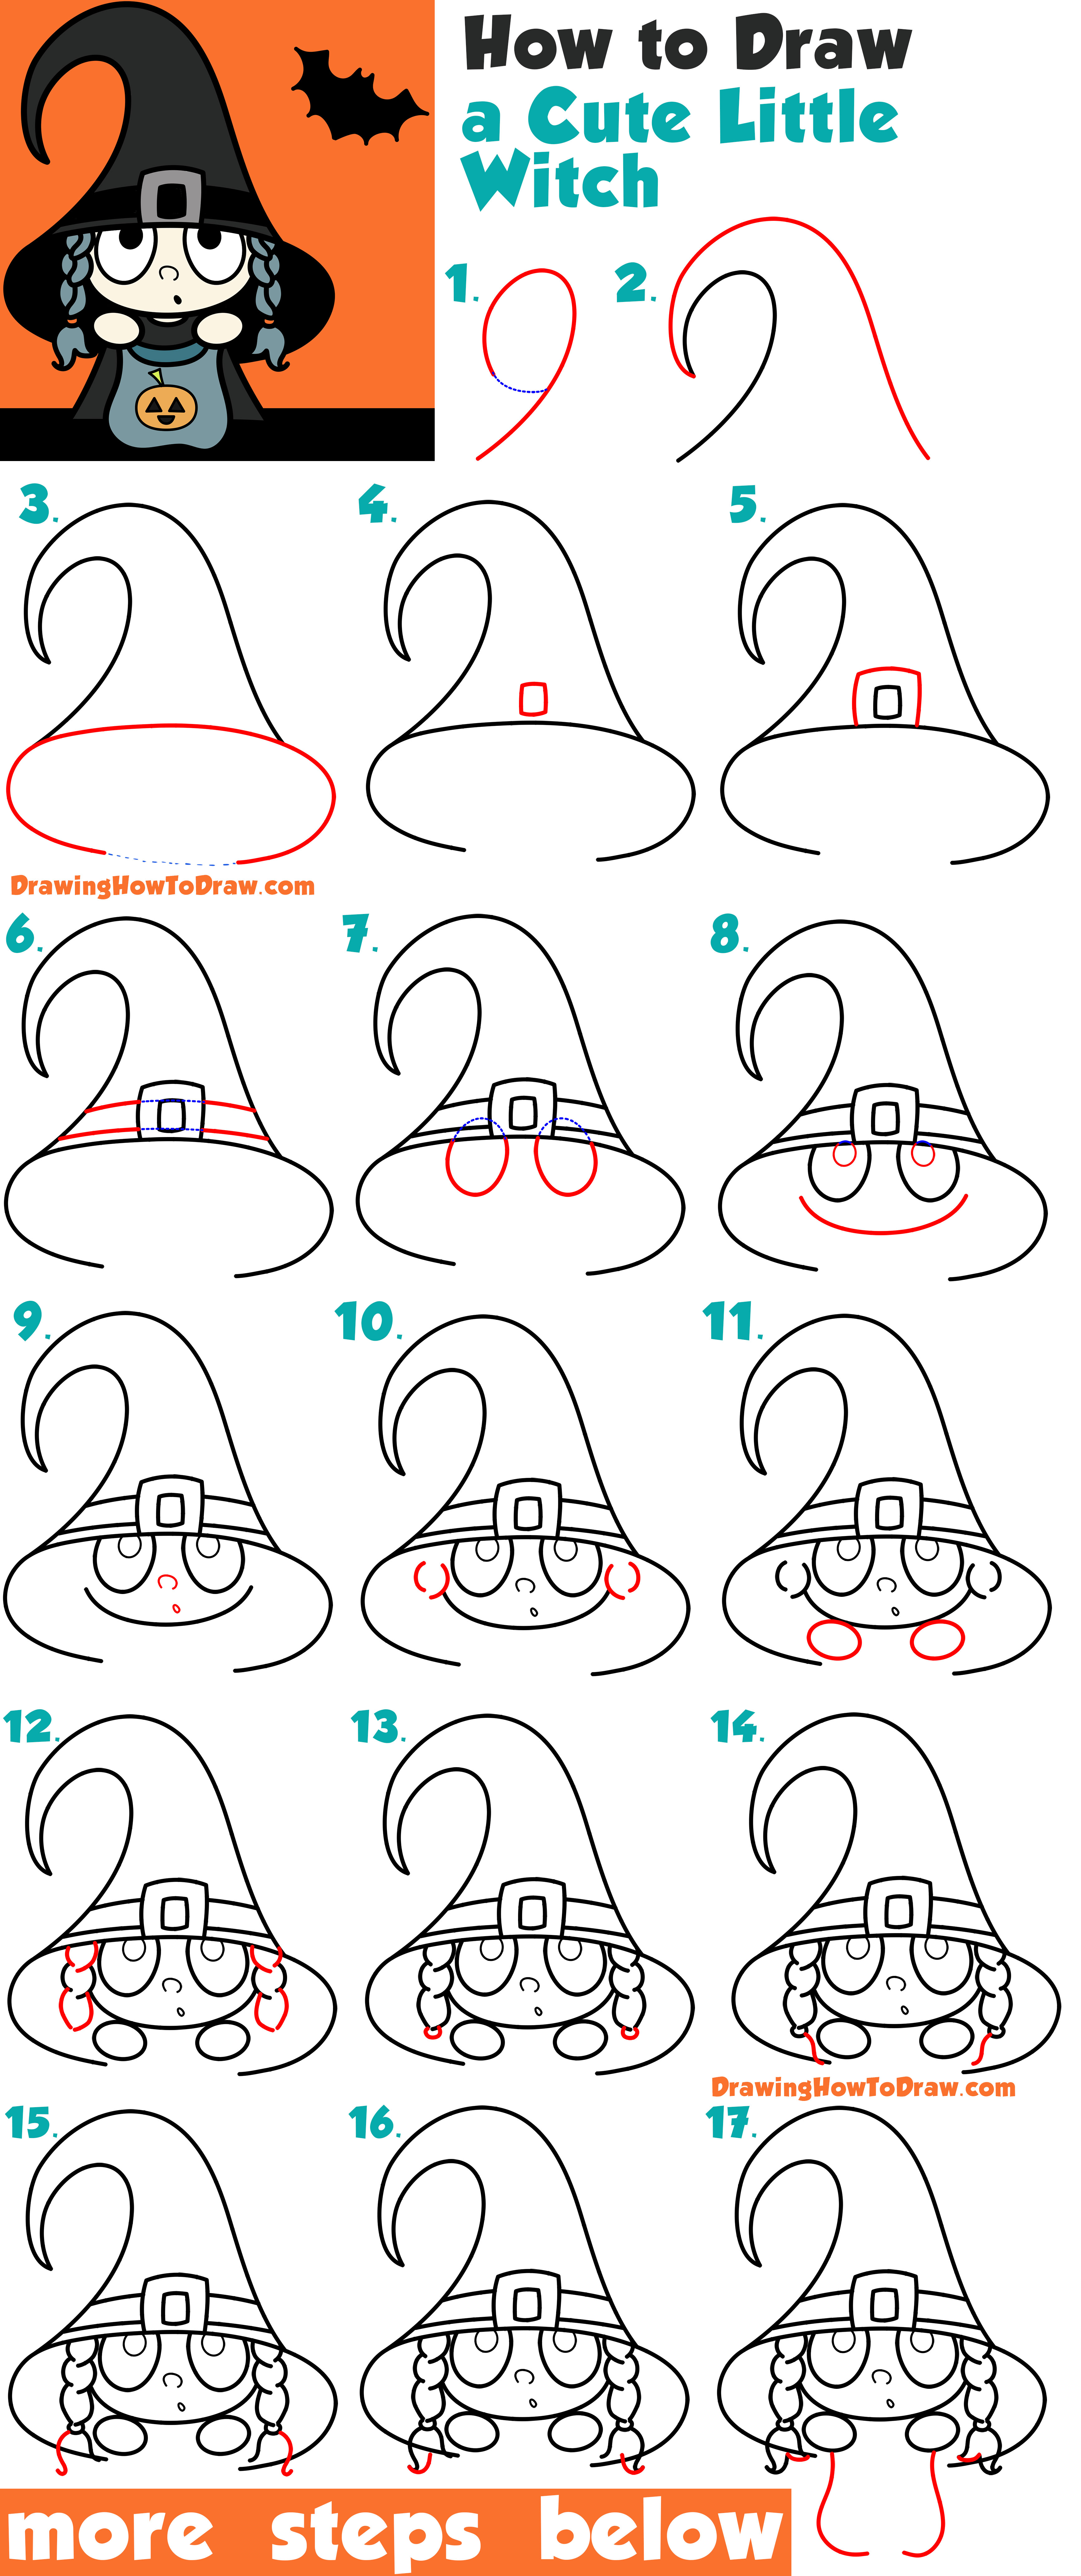 Learn How to Draw a Cute Cartoon Kid Dressed Up as a Witch for Halloween - Easy Step by Step Drawing Tutorial